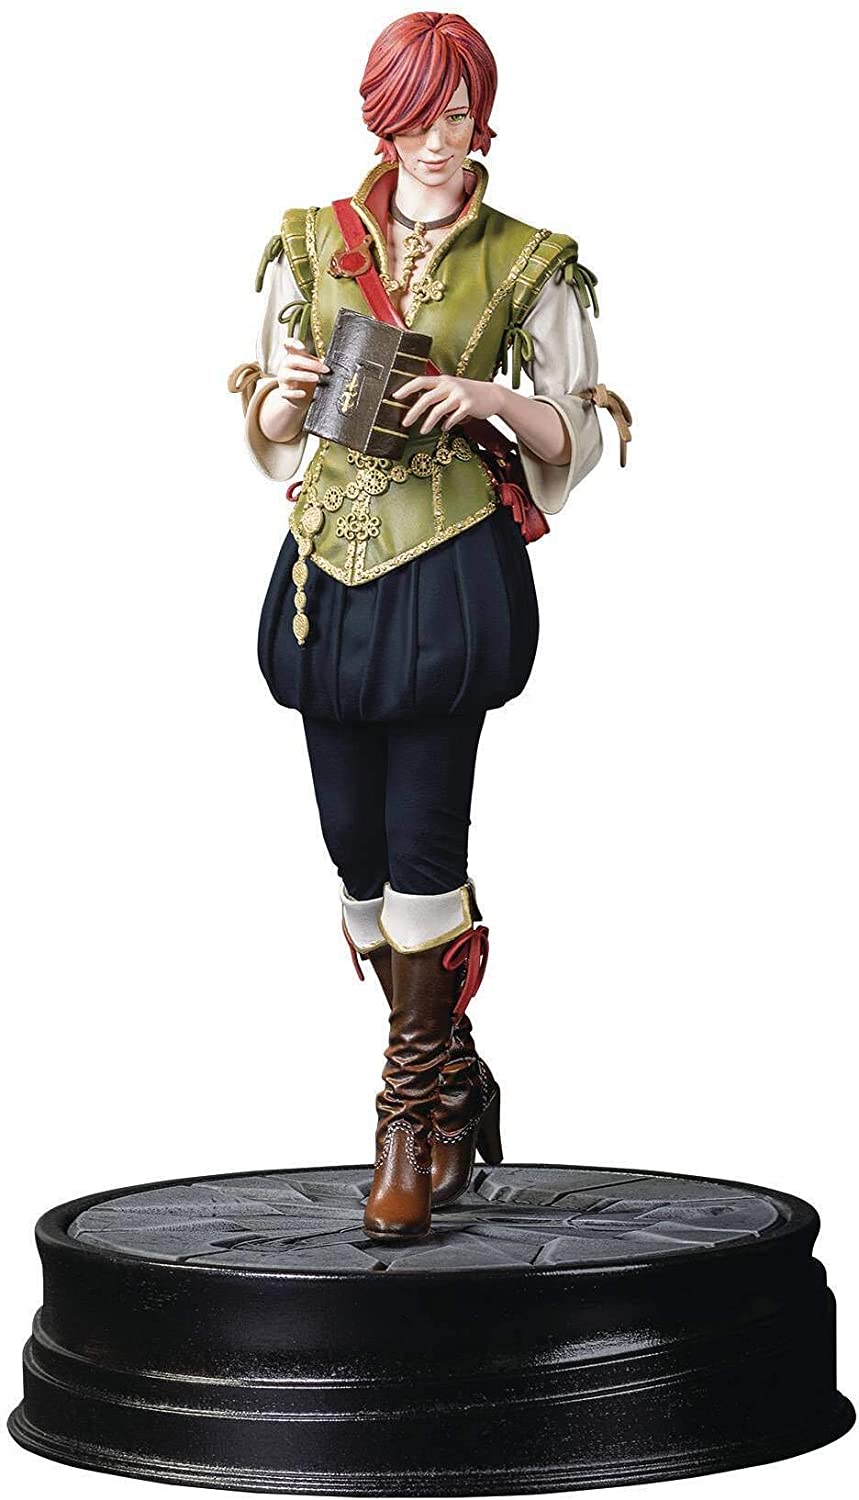 The Witcher 3000-889 3 Shani Actionfigur, mehrfarbig